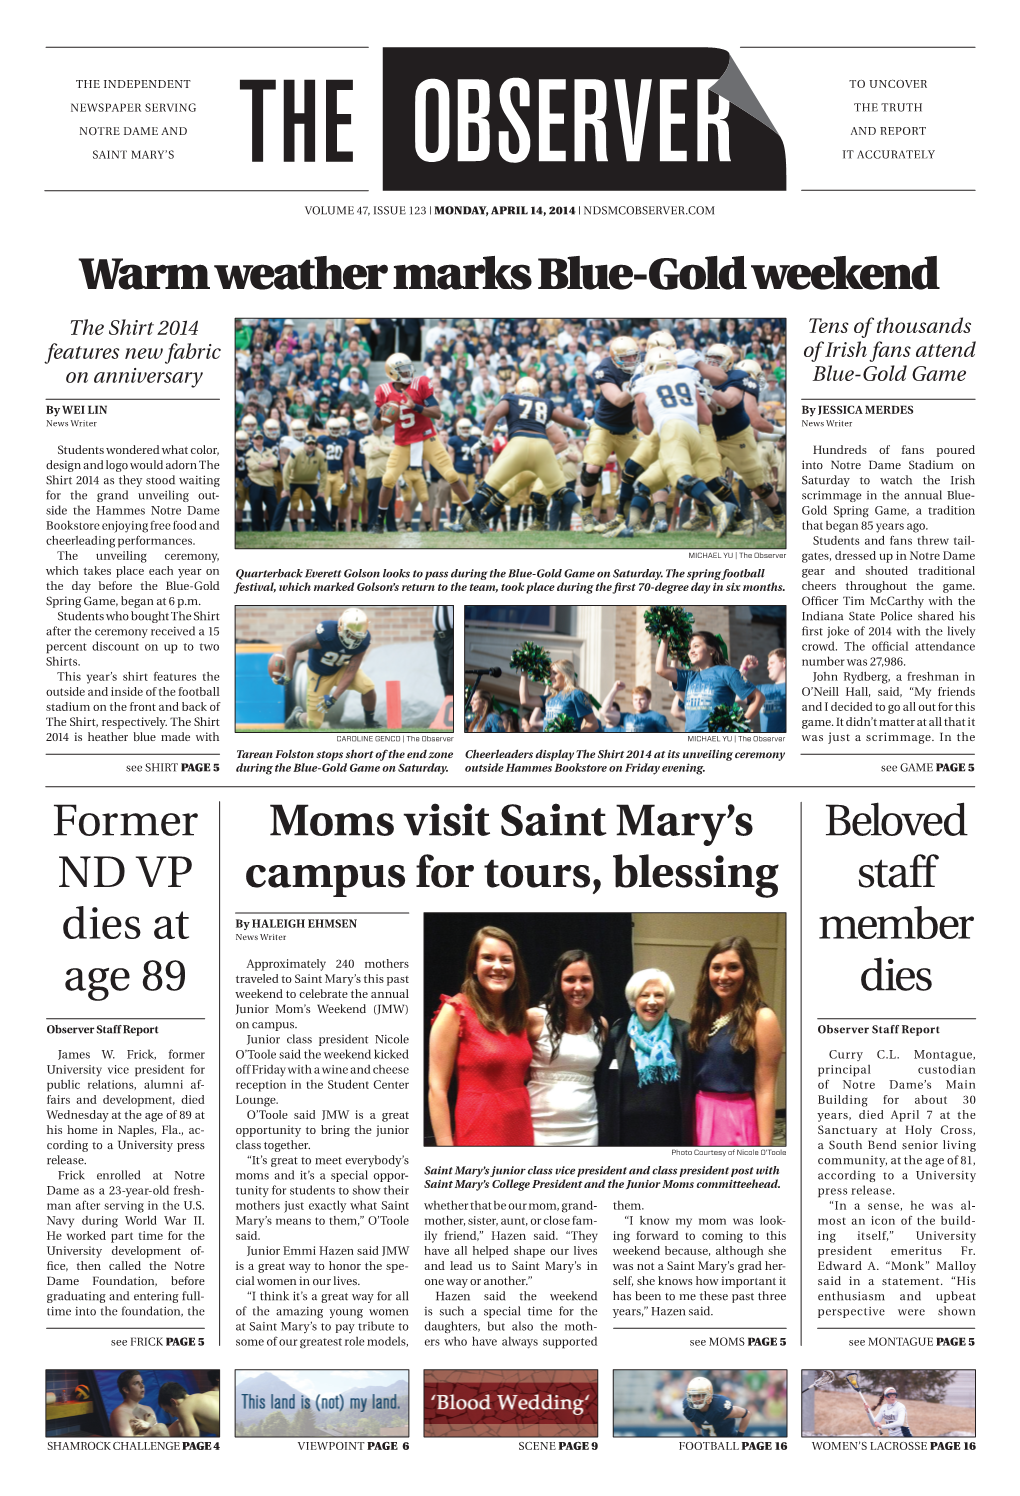 Warm Weather Marks Blue-Gold Weekend Moms Visit Saint Mary's Campus for Tours, Blessing Former Nd Vp Dies at Age 89 Beloved St